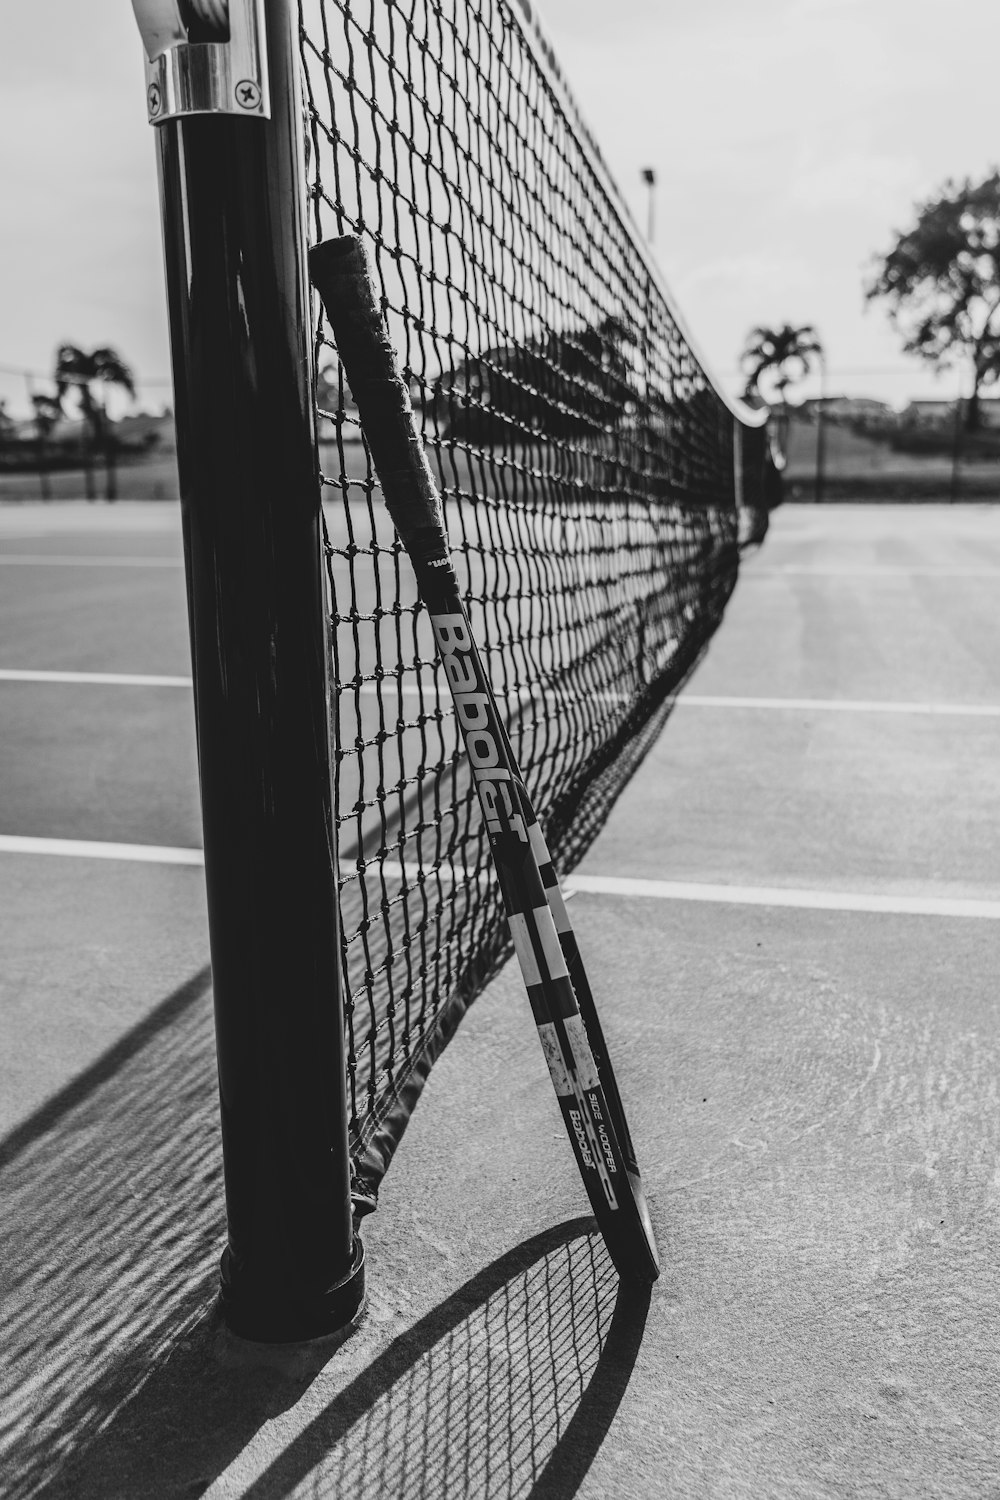 a black and white photo of a tennis net